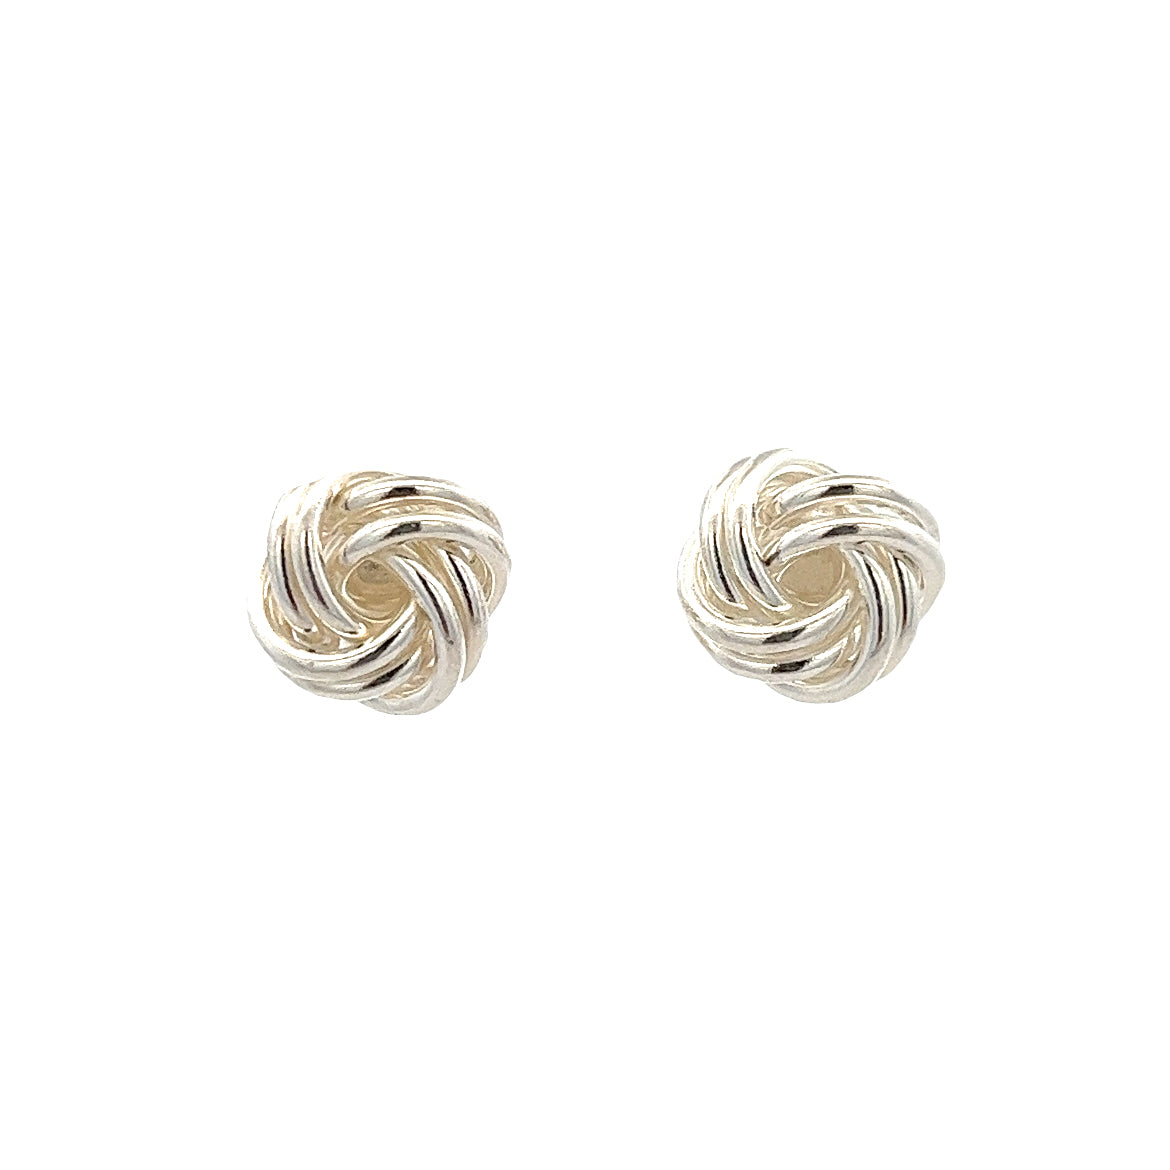 925 SILVER PLATED DOUBLE WIRE KNOT EARRINGS